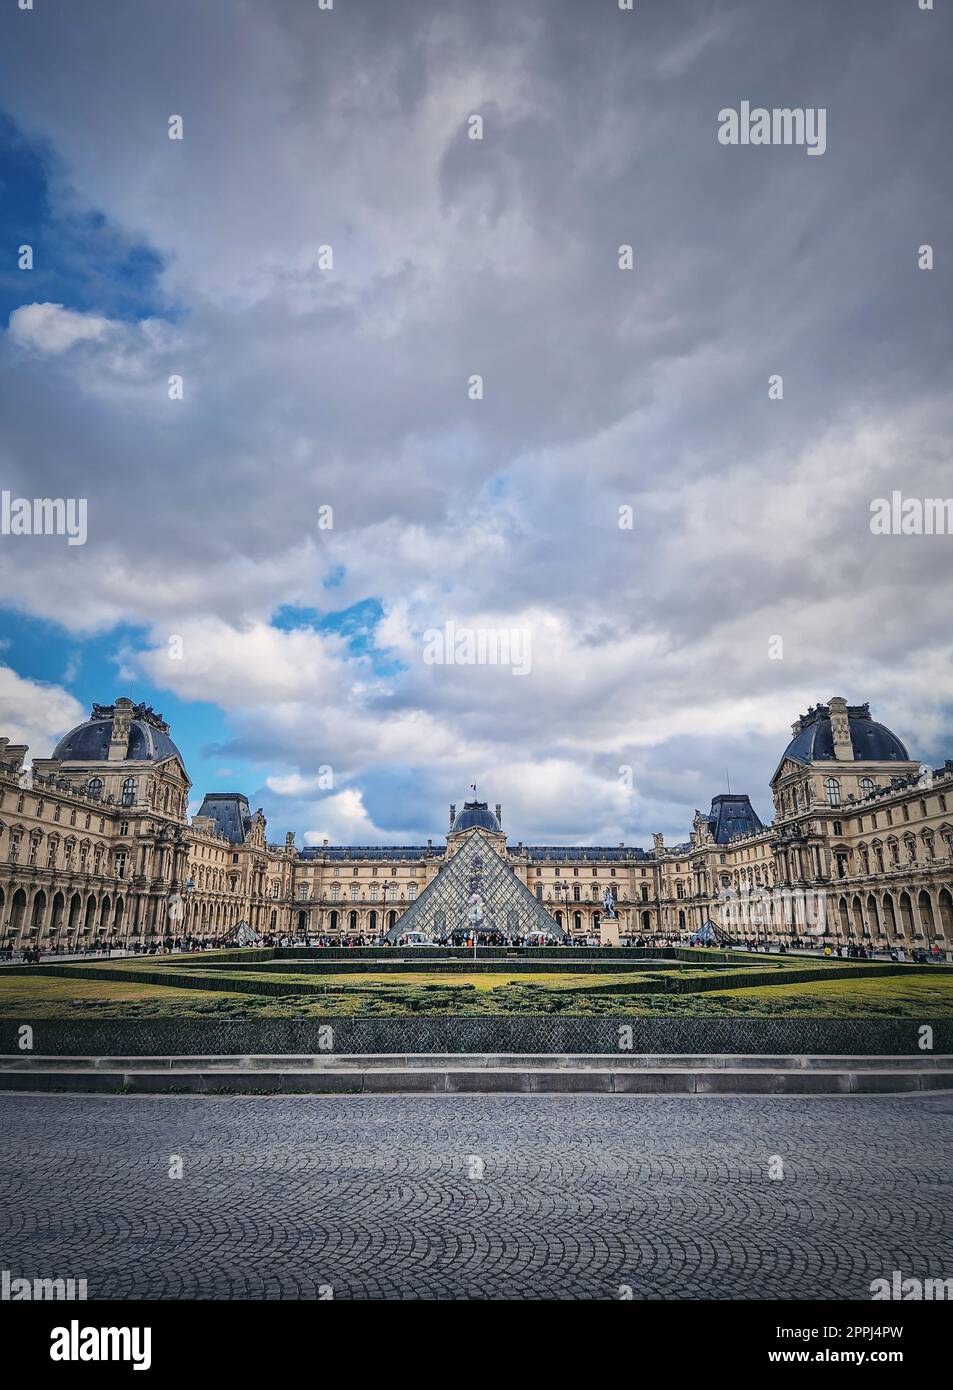 Outdoors view to the Louvre Museum in Paris, France. The historical palace building with the modern glass pyramid in center, vertical background Stock Photo